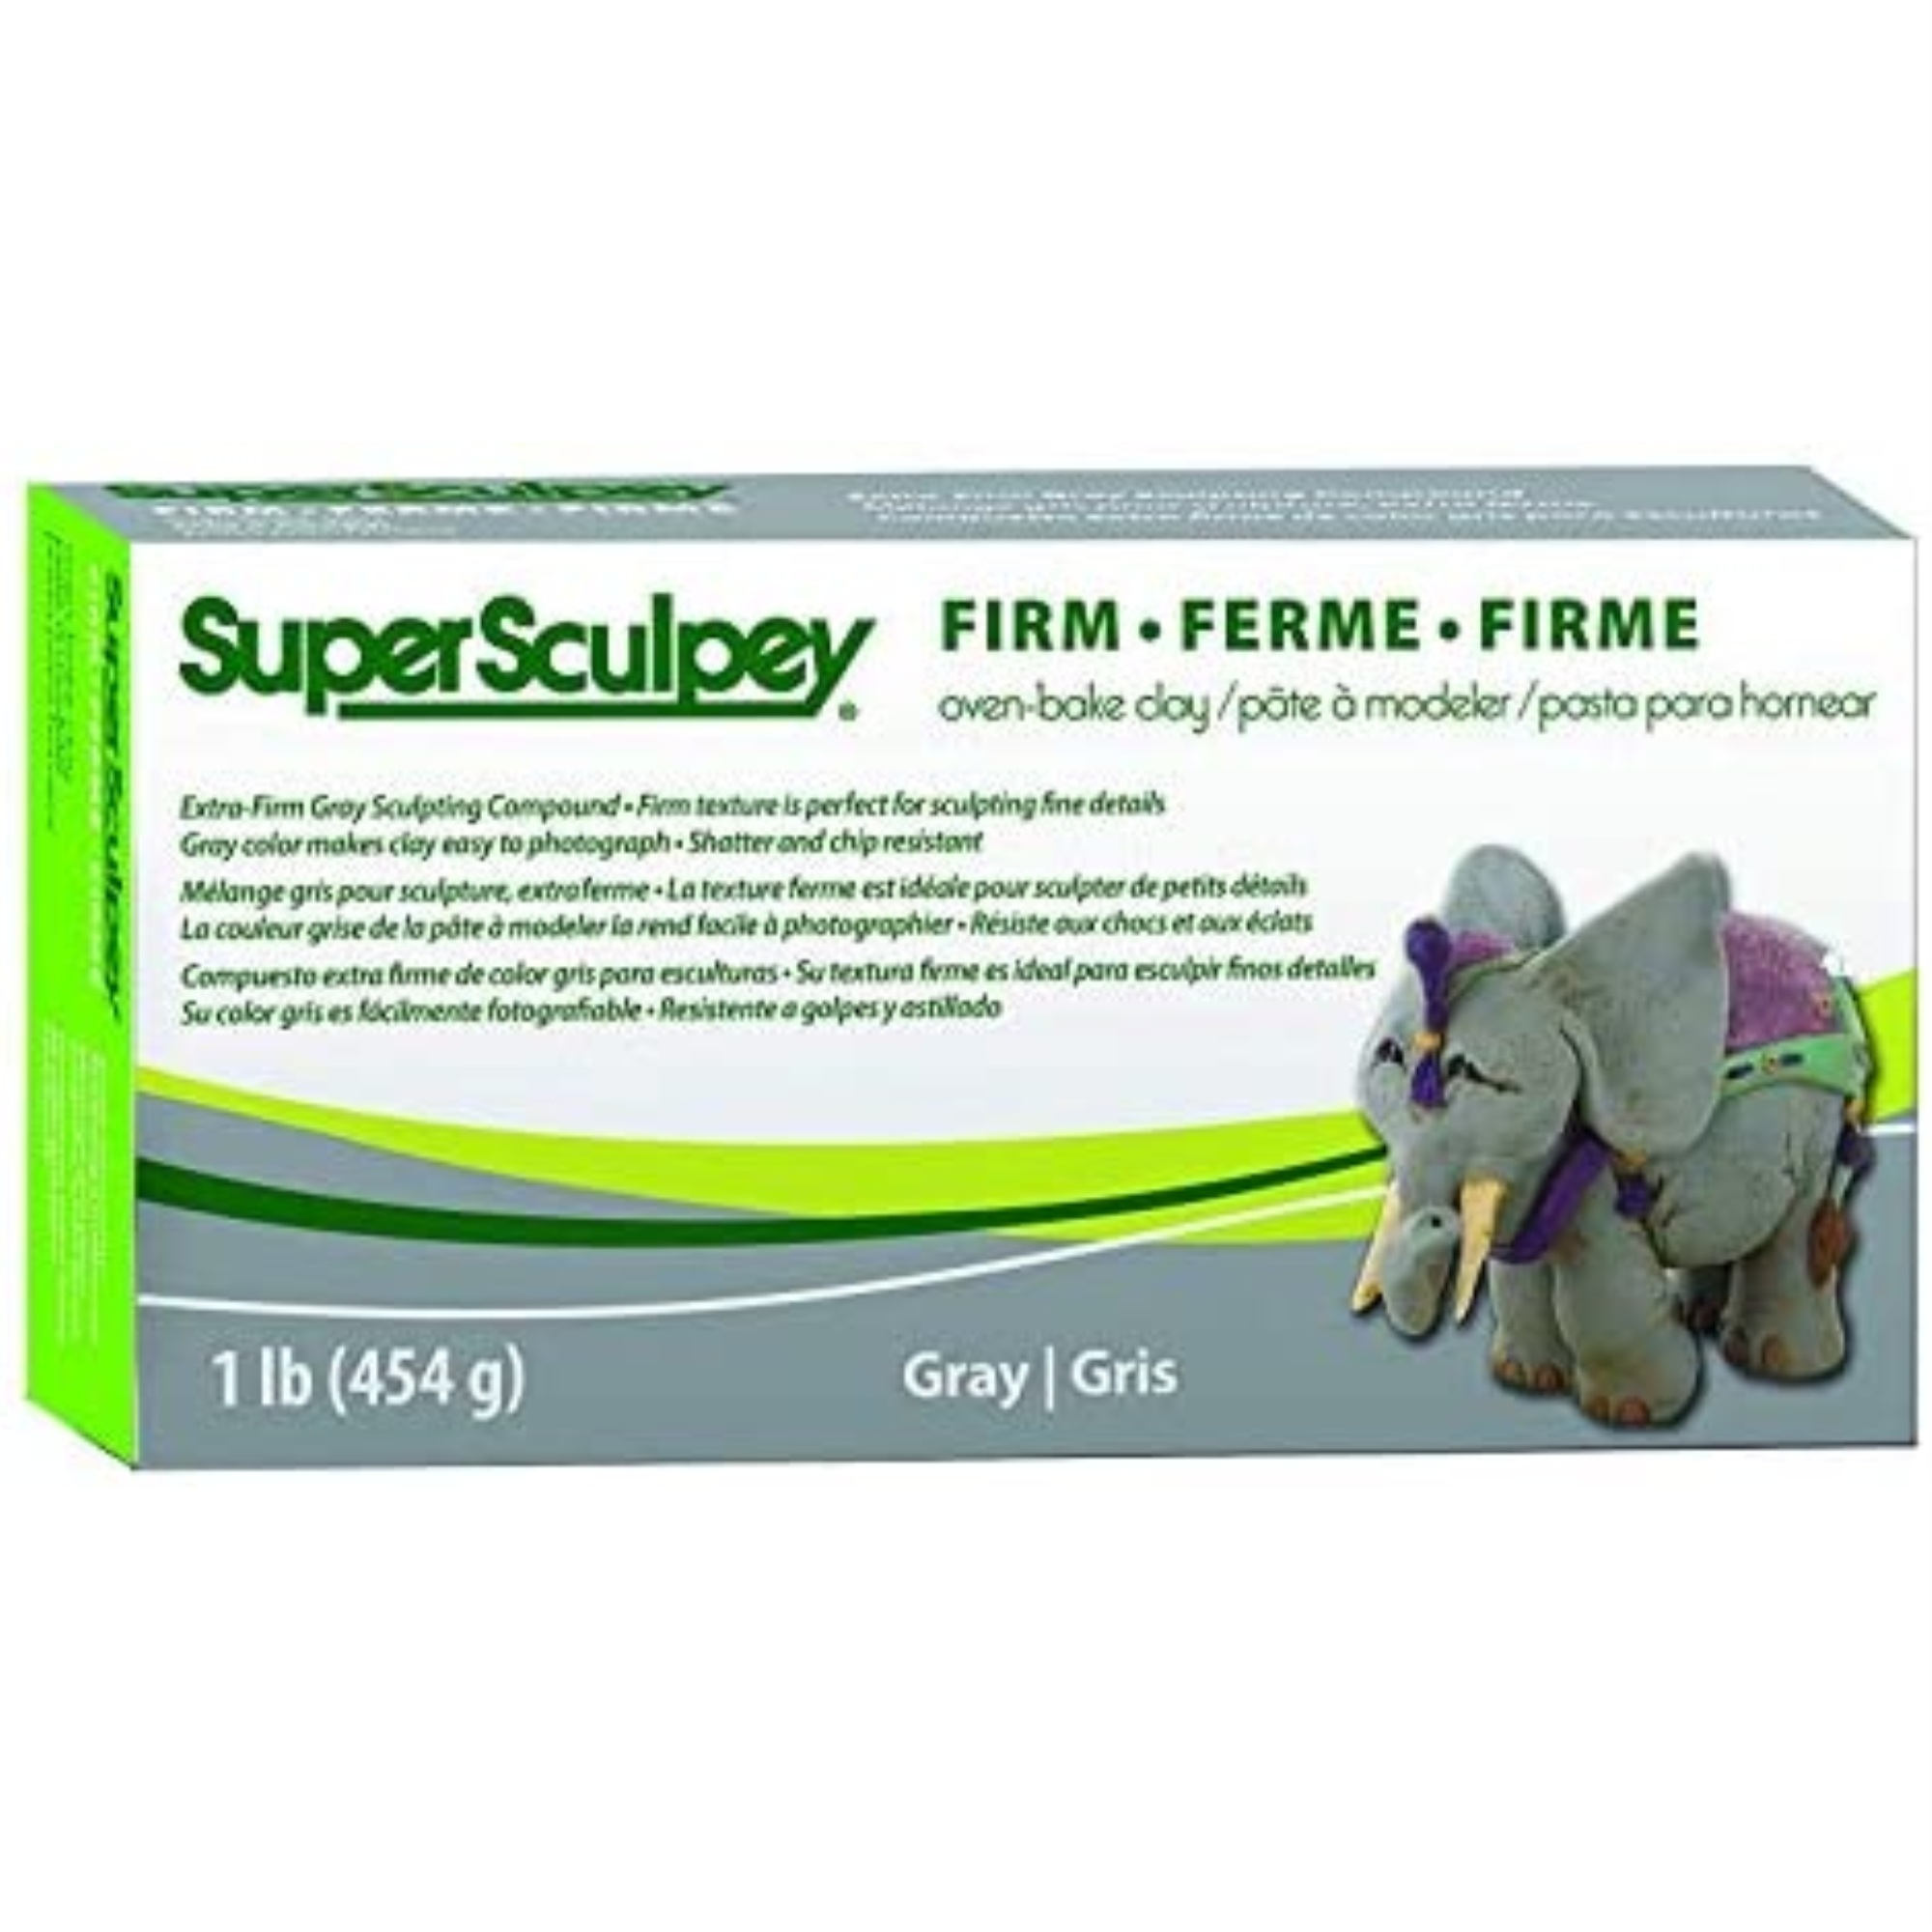 Super Sculpey Firm Gray, Premium, Non Toxic, Firm, Sculpting Modeling Polymer clay, Oven Bake Clay, 1 pound bar. - image 1 of 5